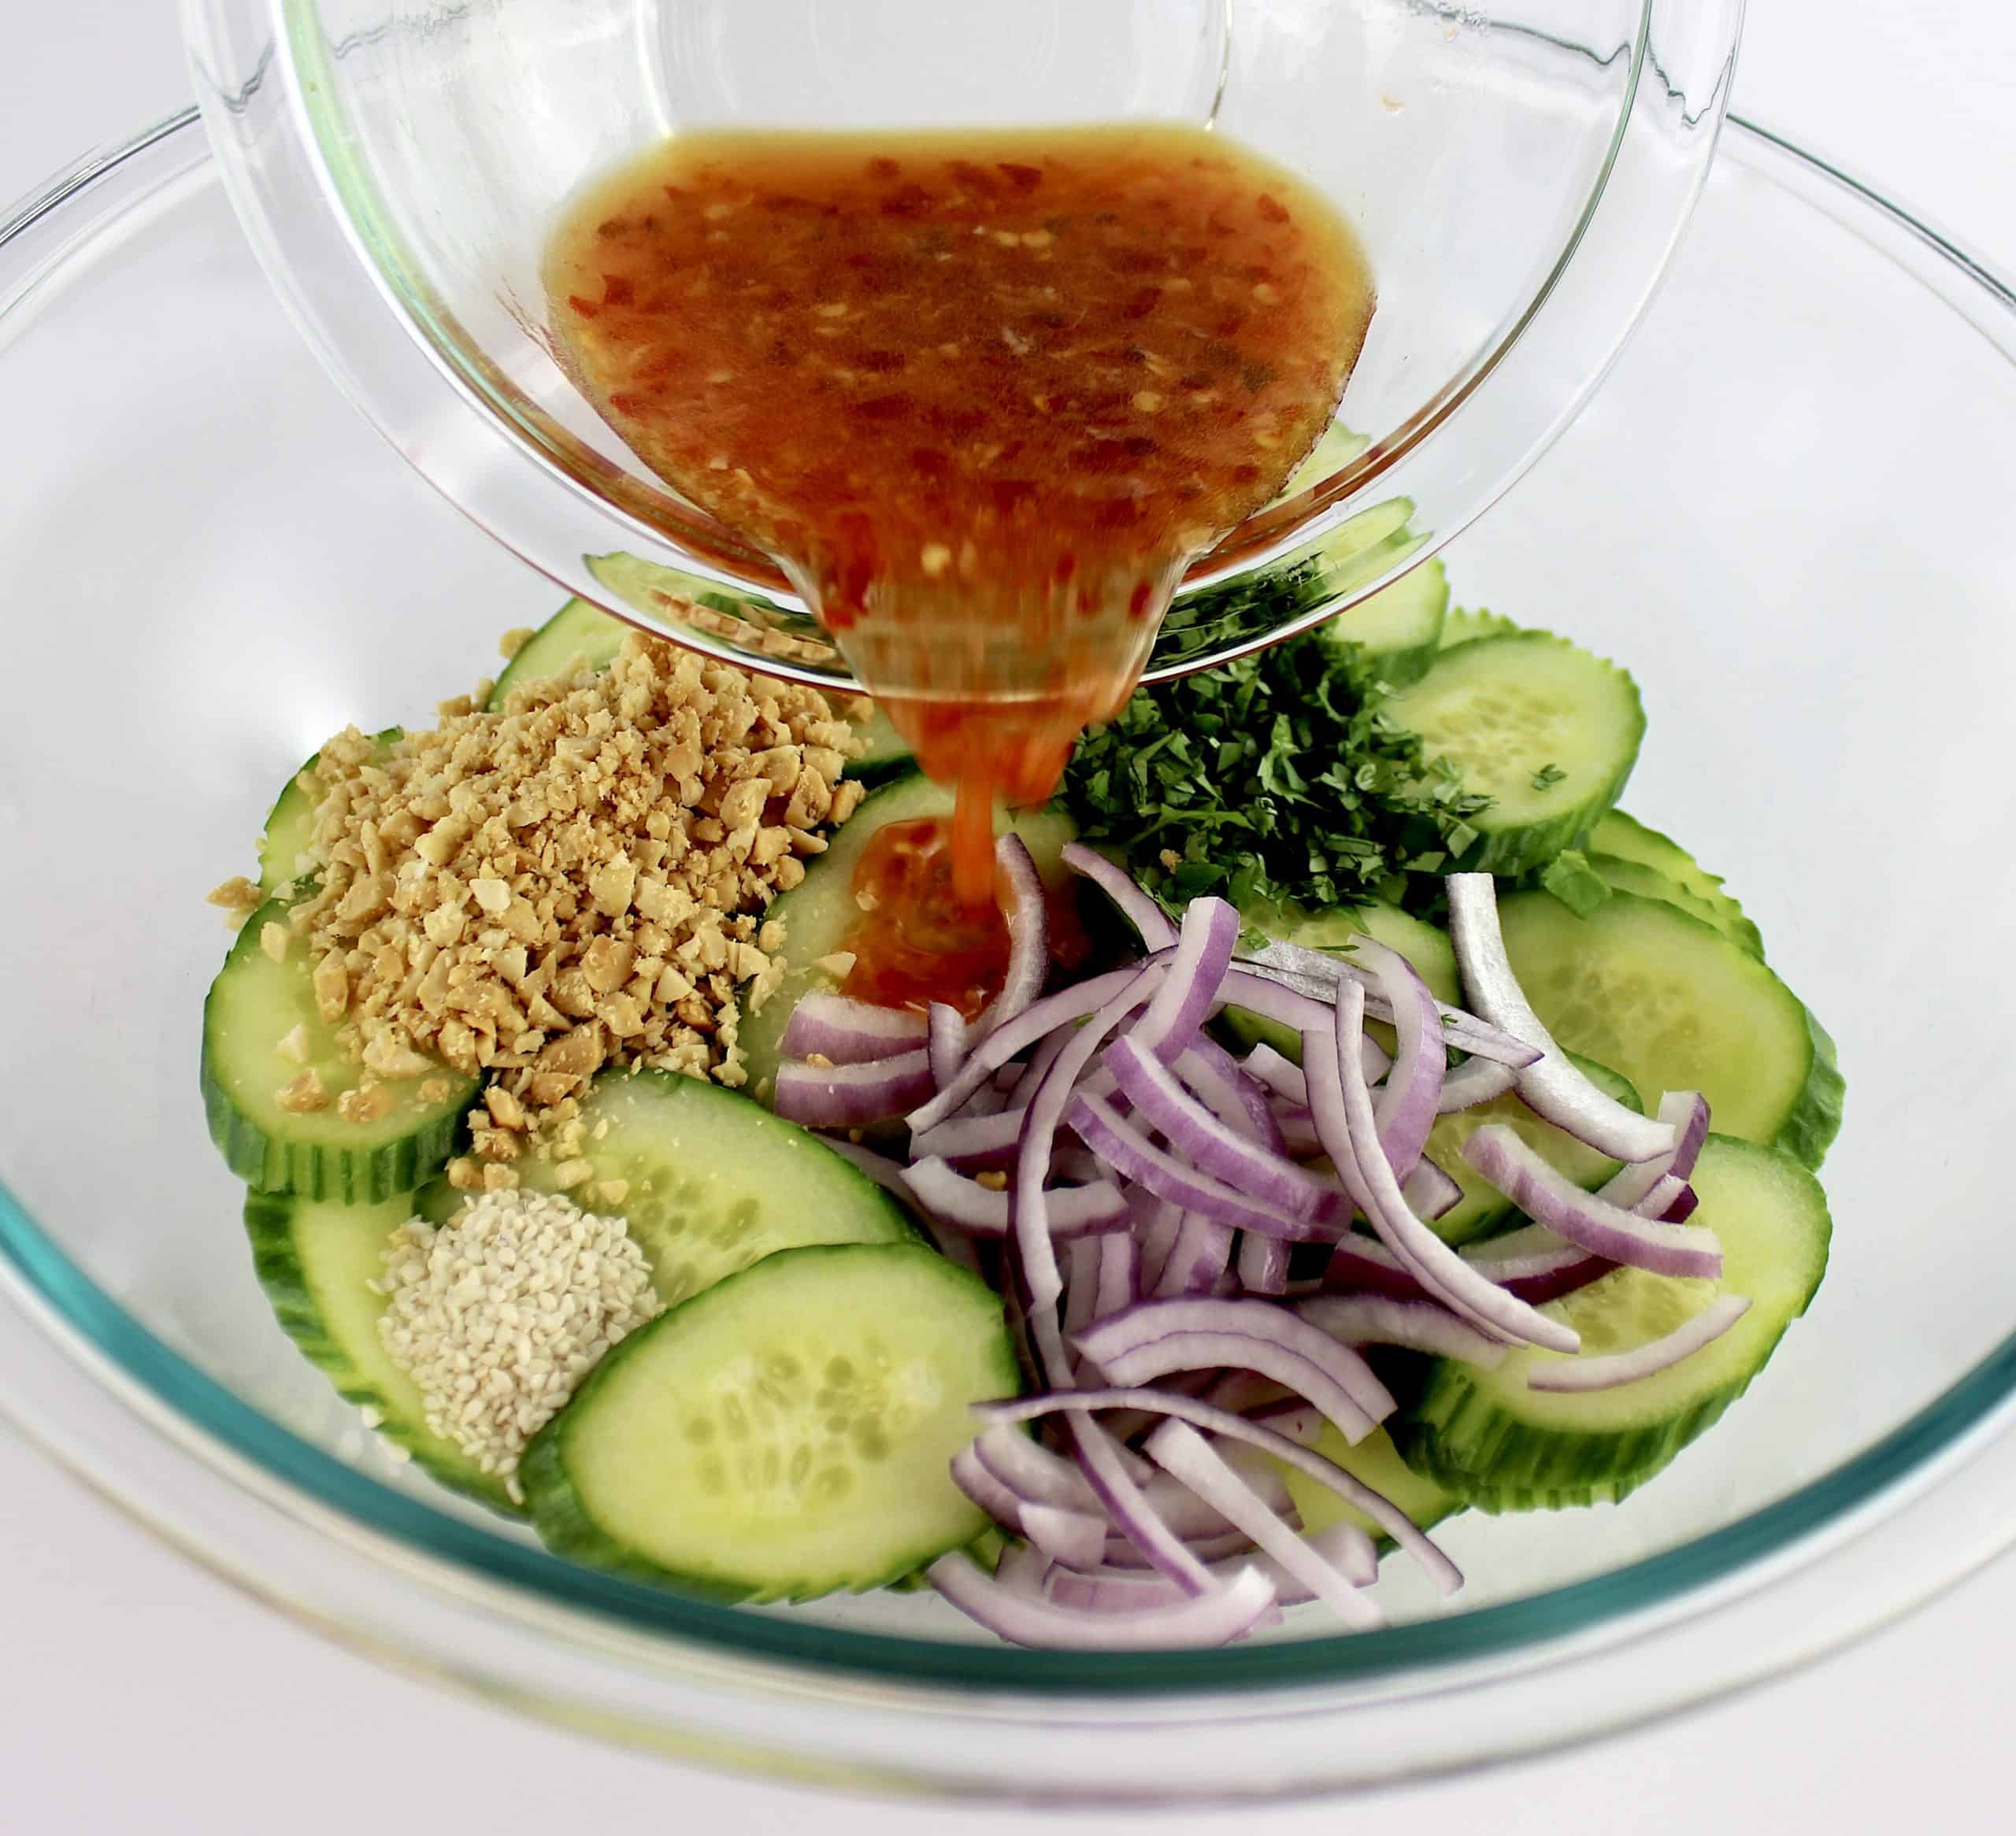 dressing being poured over cucumber salad in glass bowl